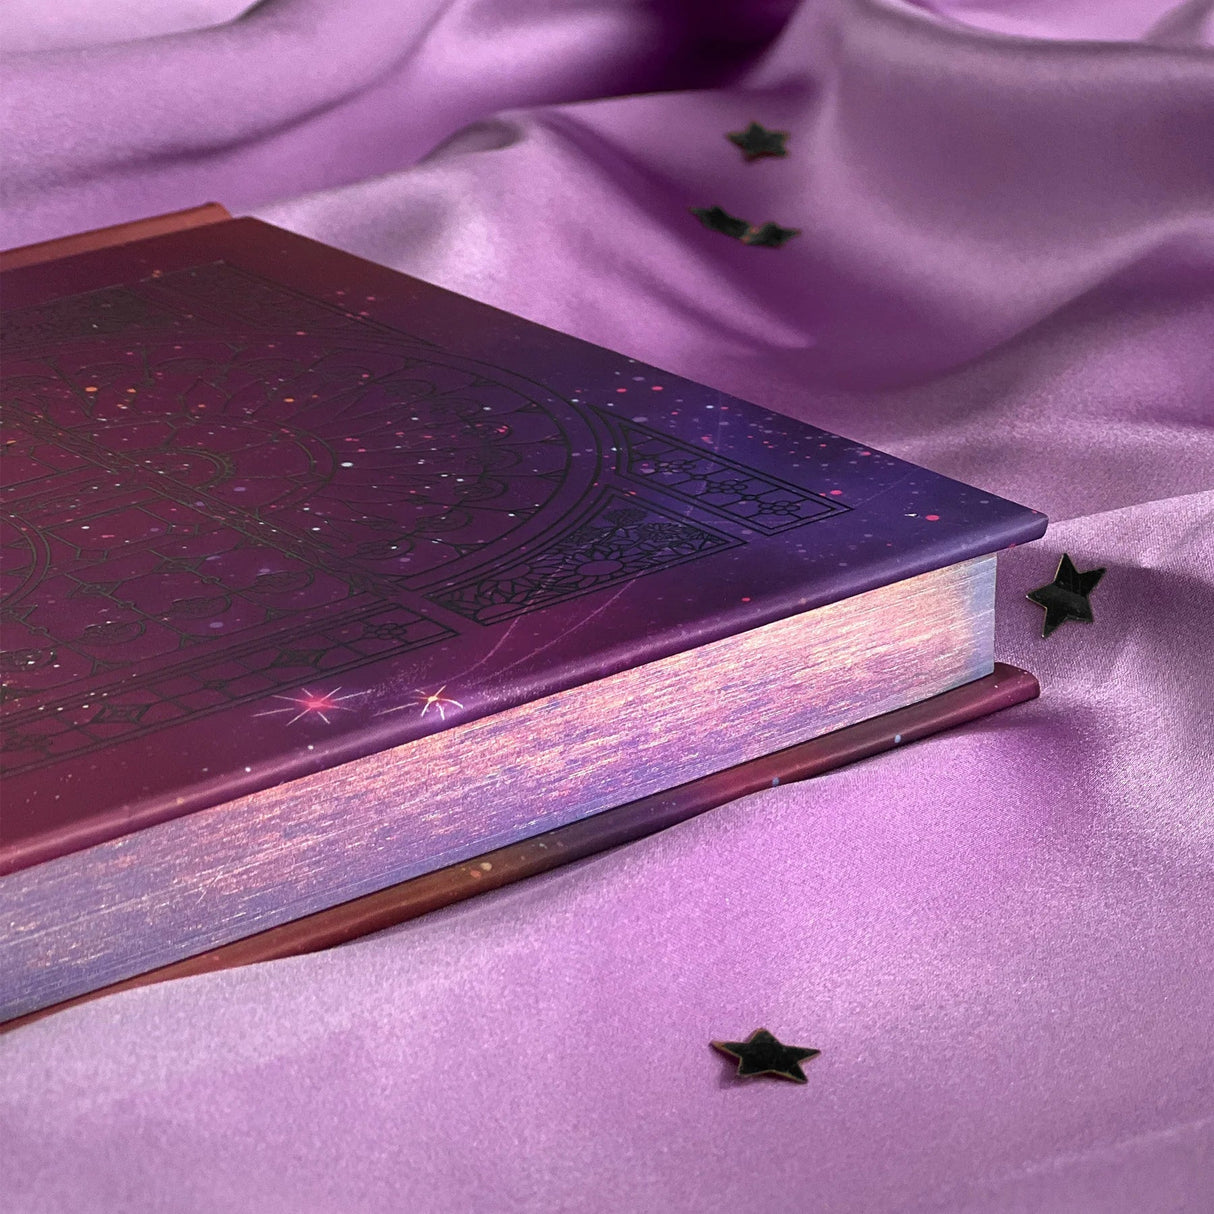 Iridescence Journal with lined pages holographic page edges